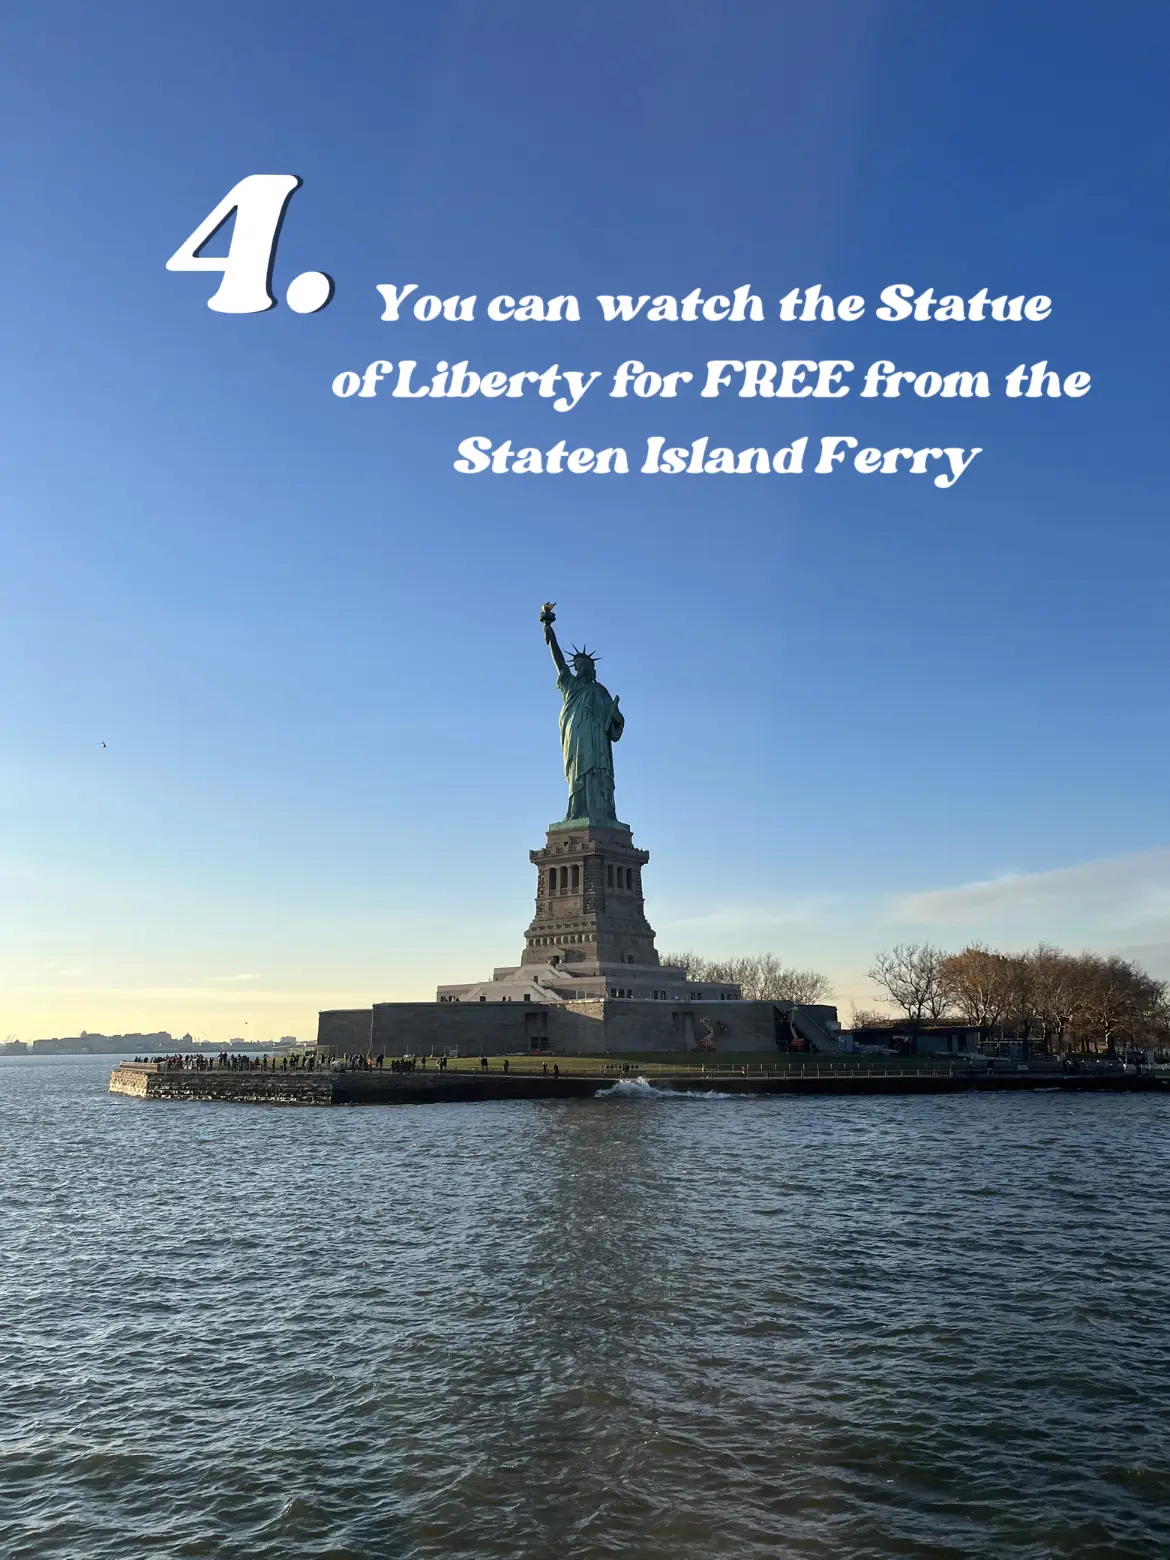  The image shows a view of the Statue of Liberty from the Staten Island Ferry.